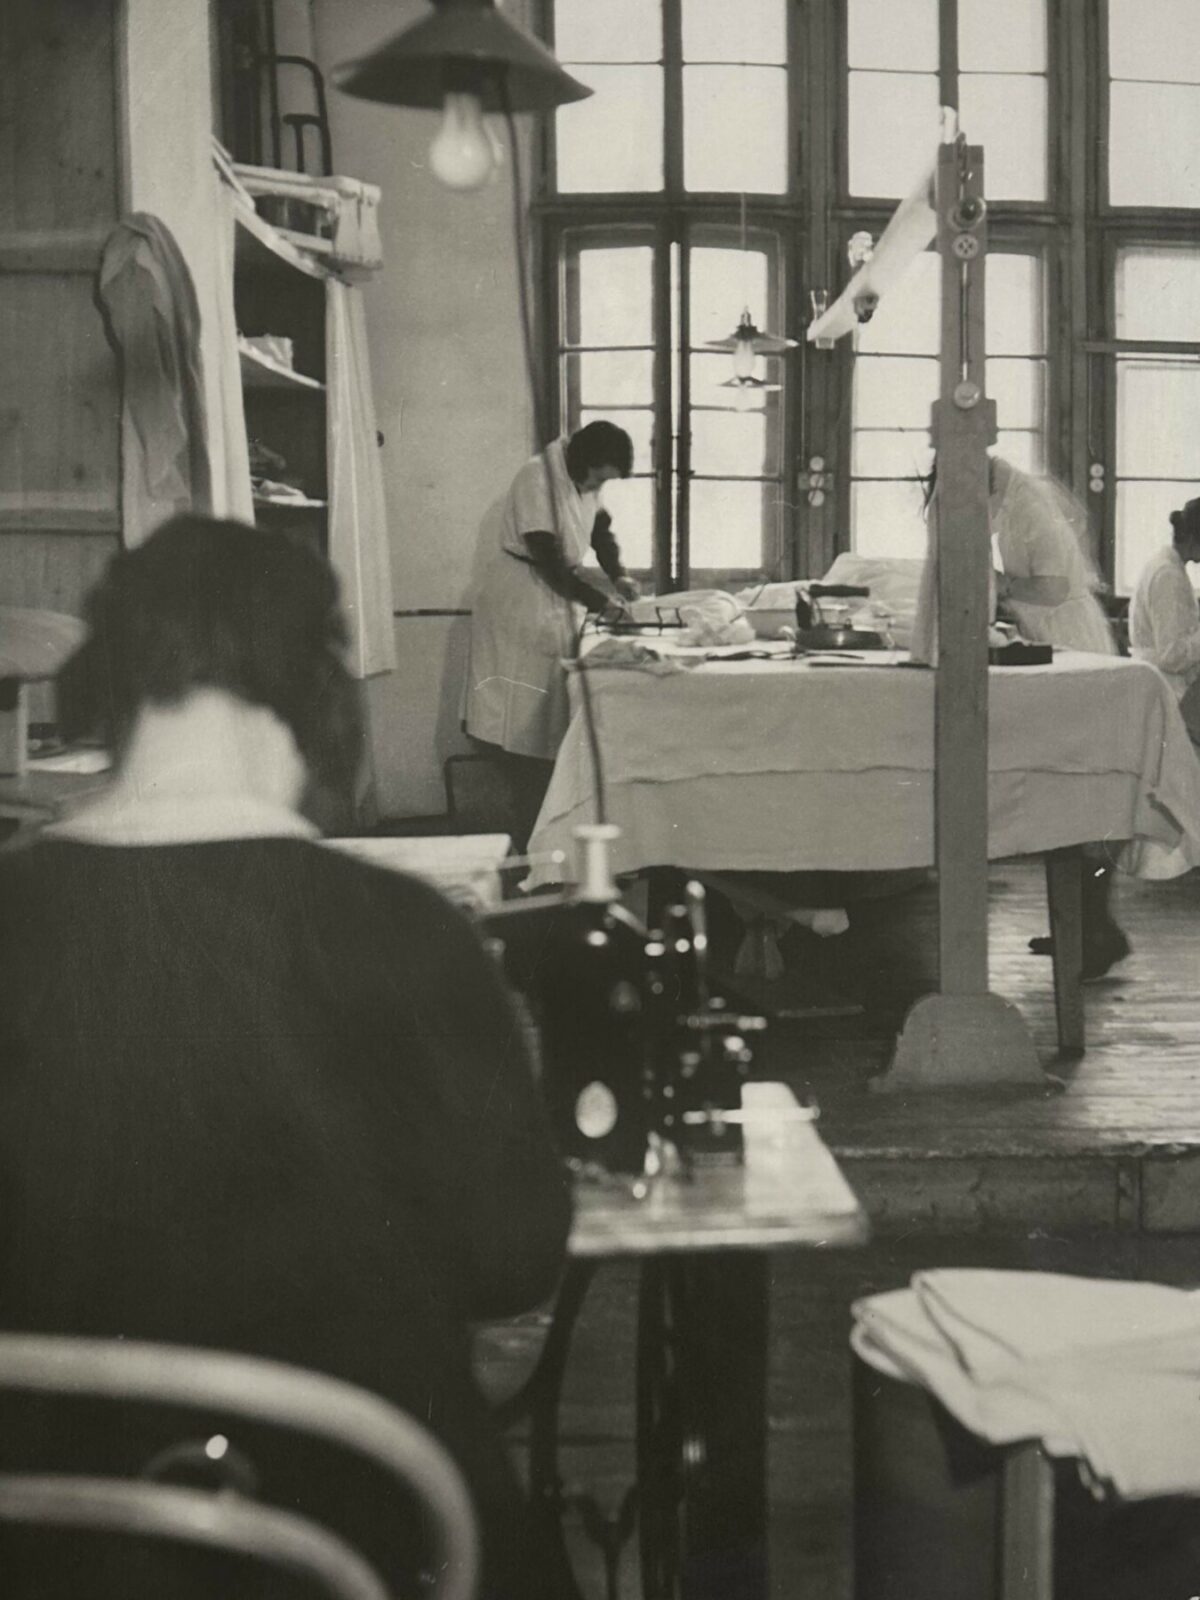 Black and white photo of hotel housekeeping department sewing and ironing